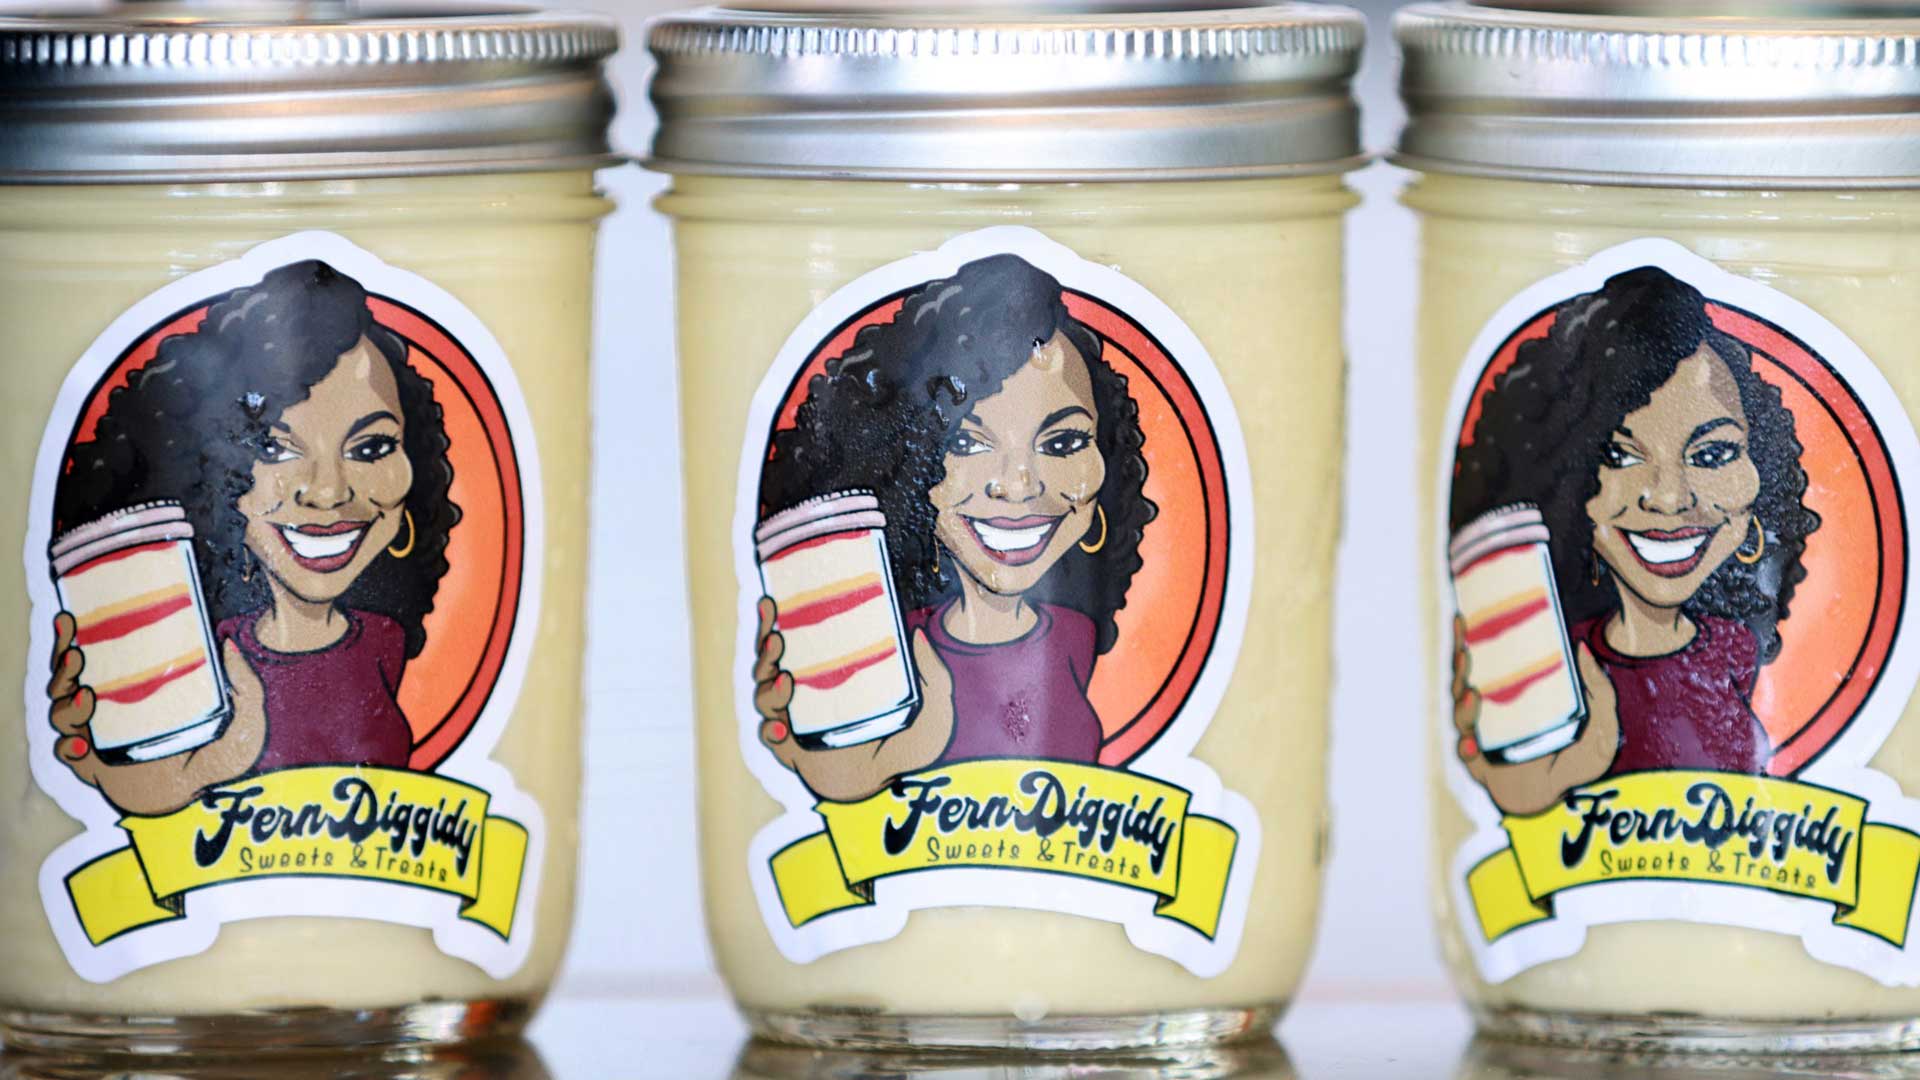 FernDiggidy Sweets & Treats dessert Mason jars are sold at the Uptown Farmers Market in Phoenix, Retail Therapy AZ in Glendale and Main Street Harvest community grocer in Mesa. September 2022. 